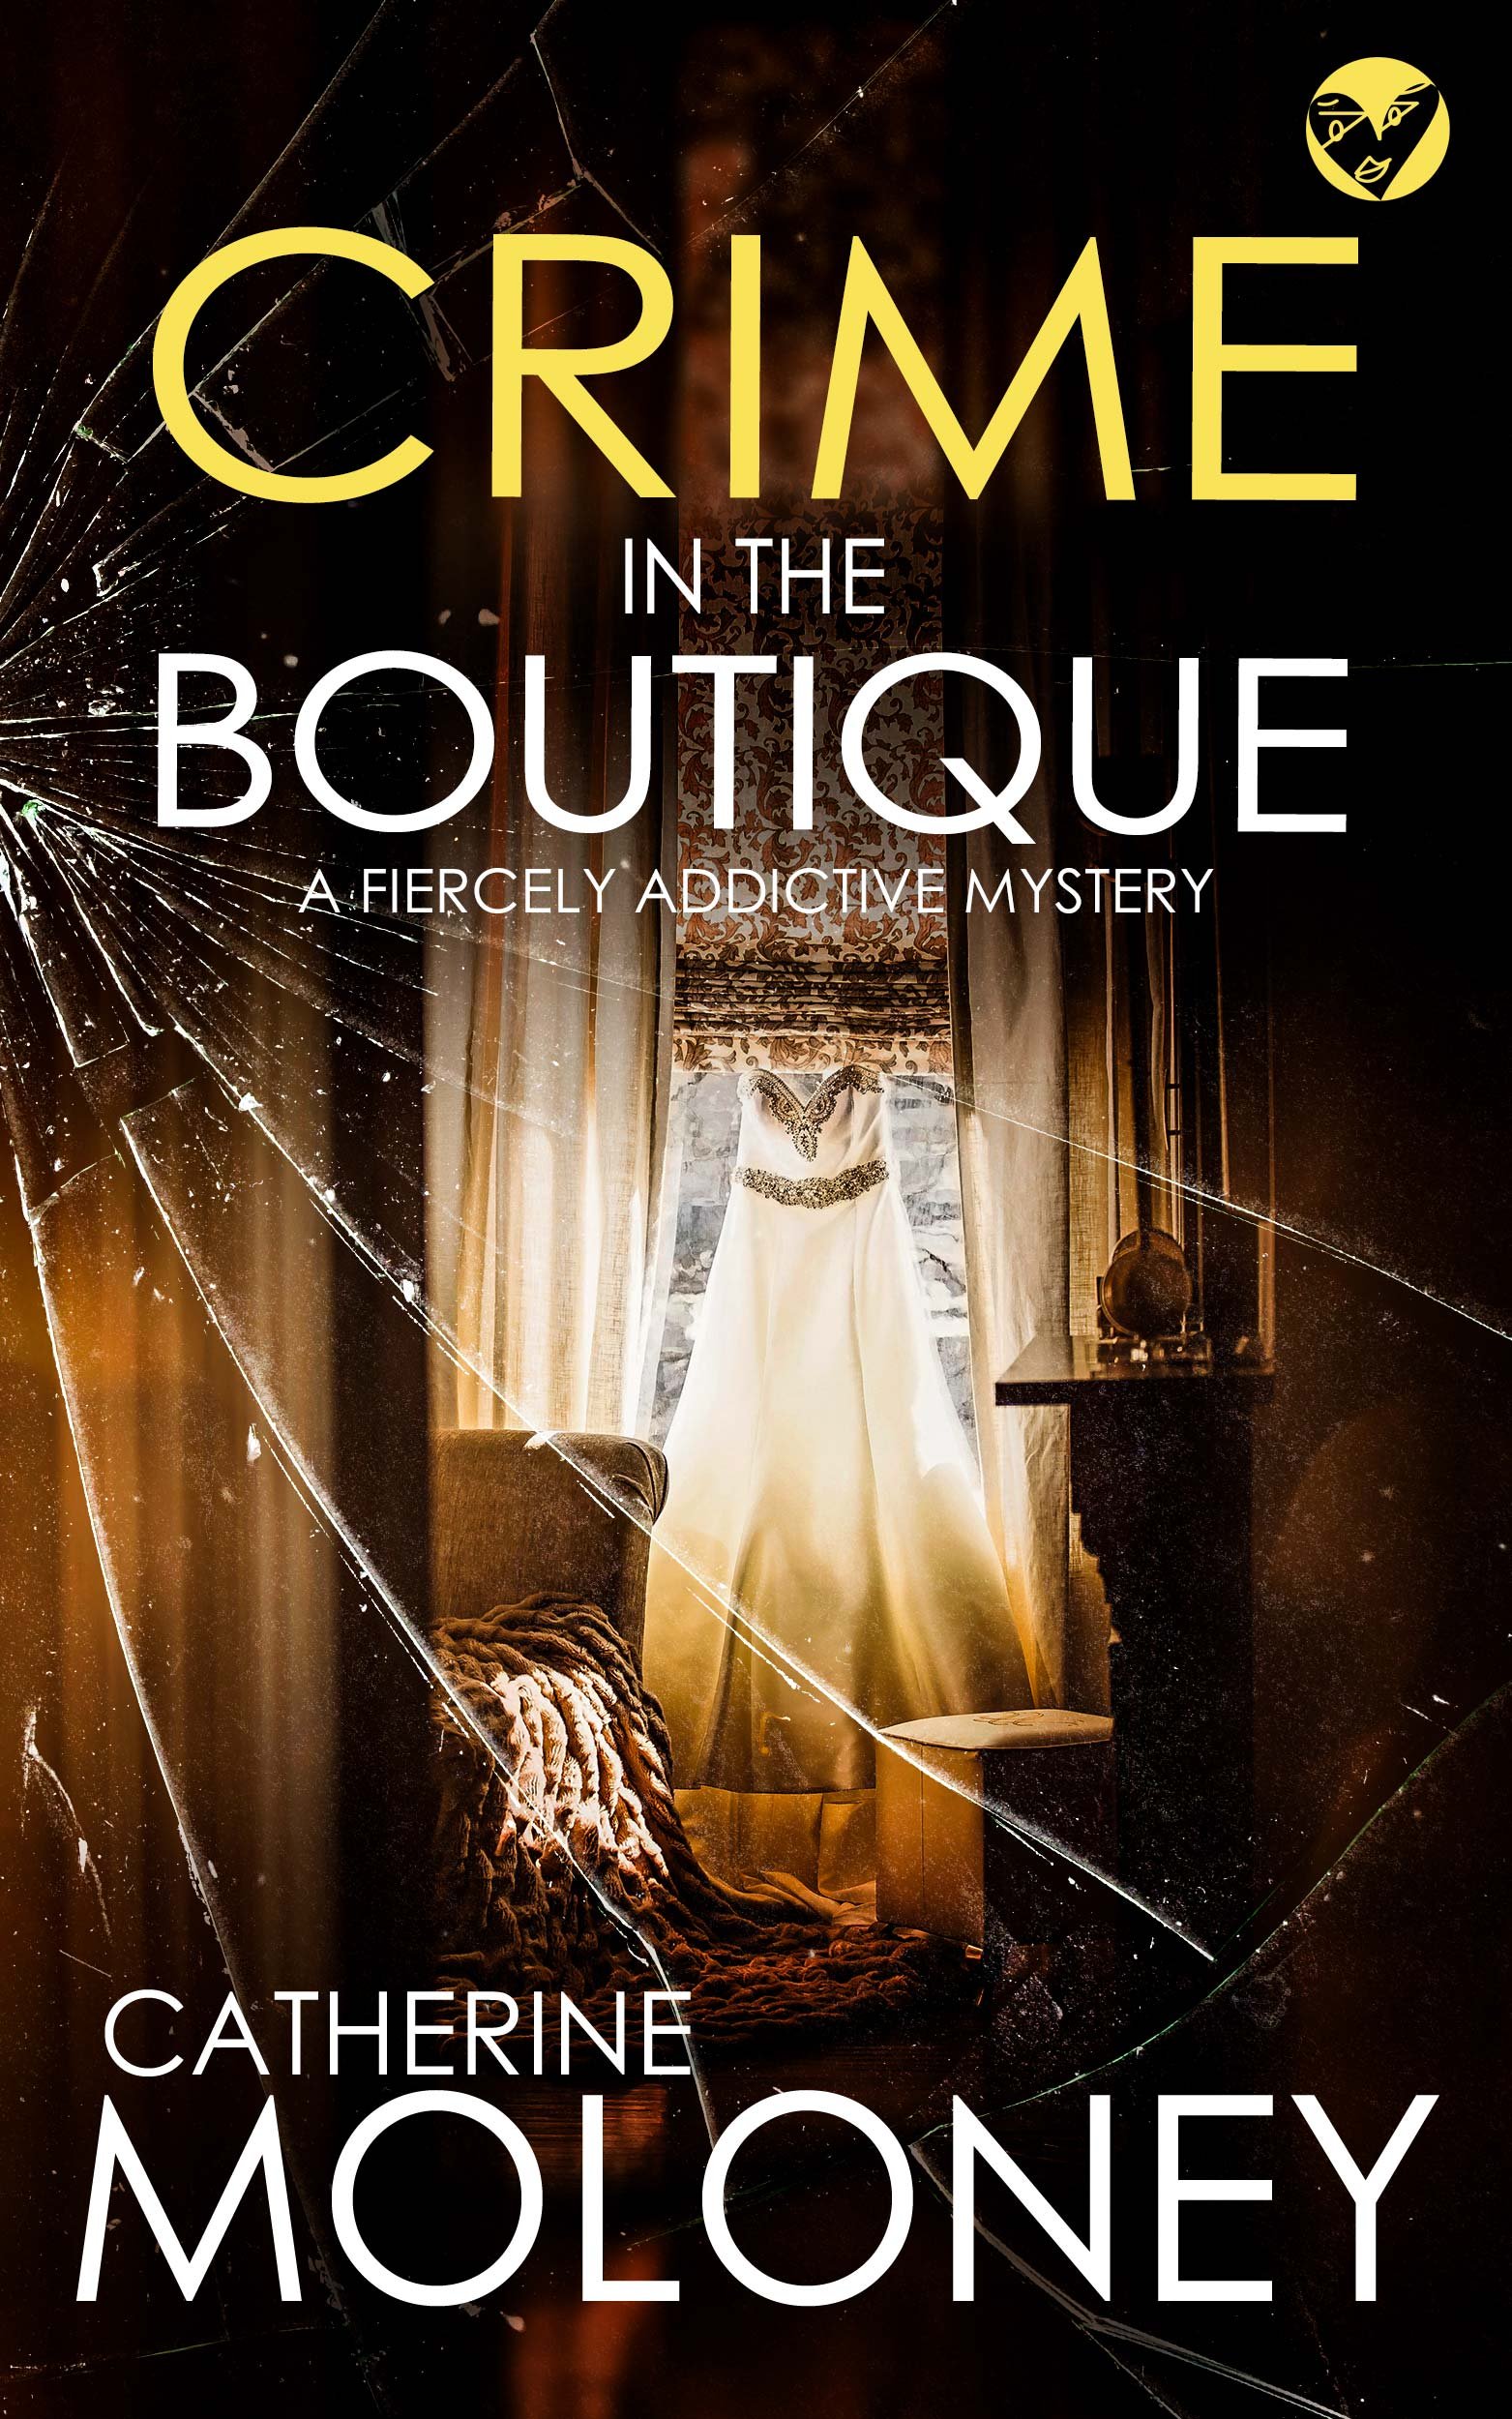 CRIME IN THE BOUTIQUE Cover publish 515KB.jpg